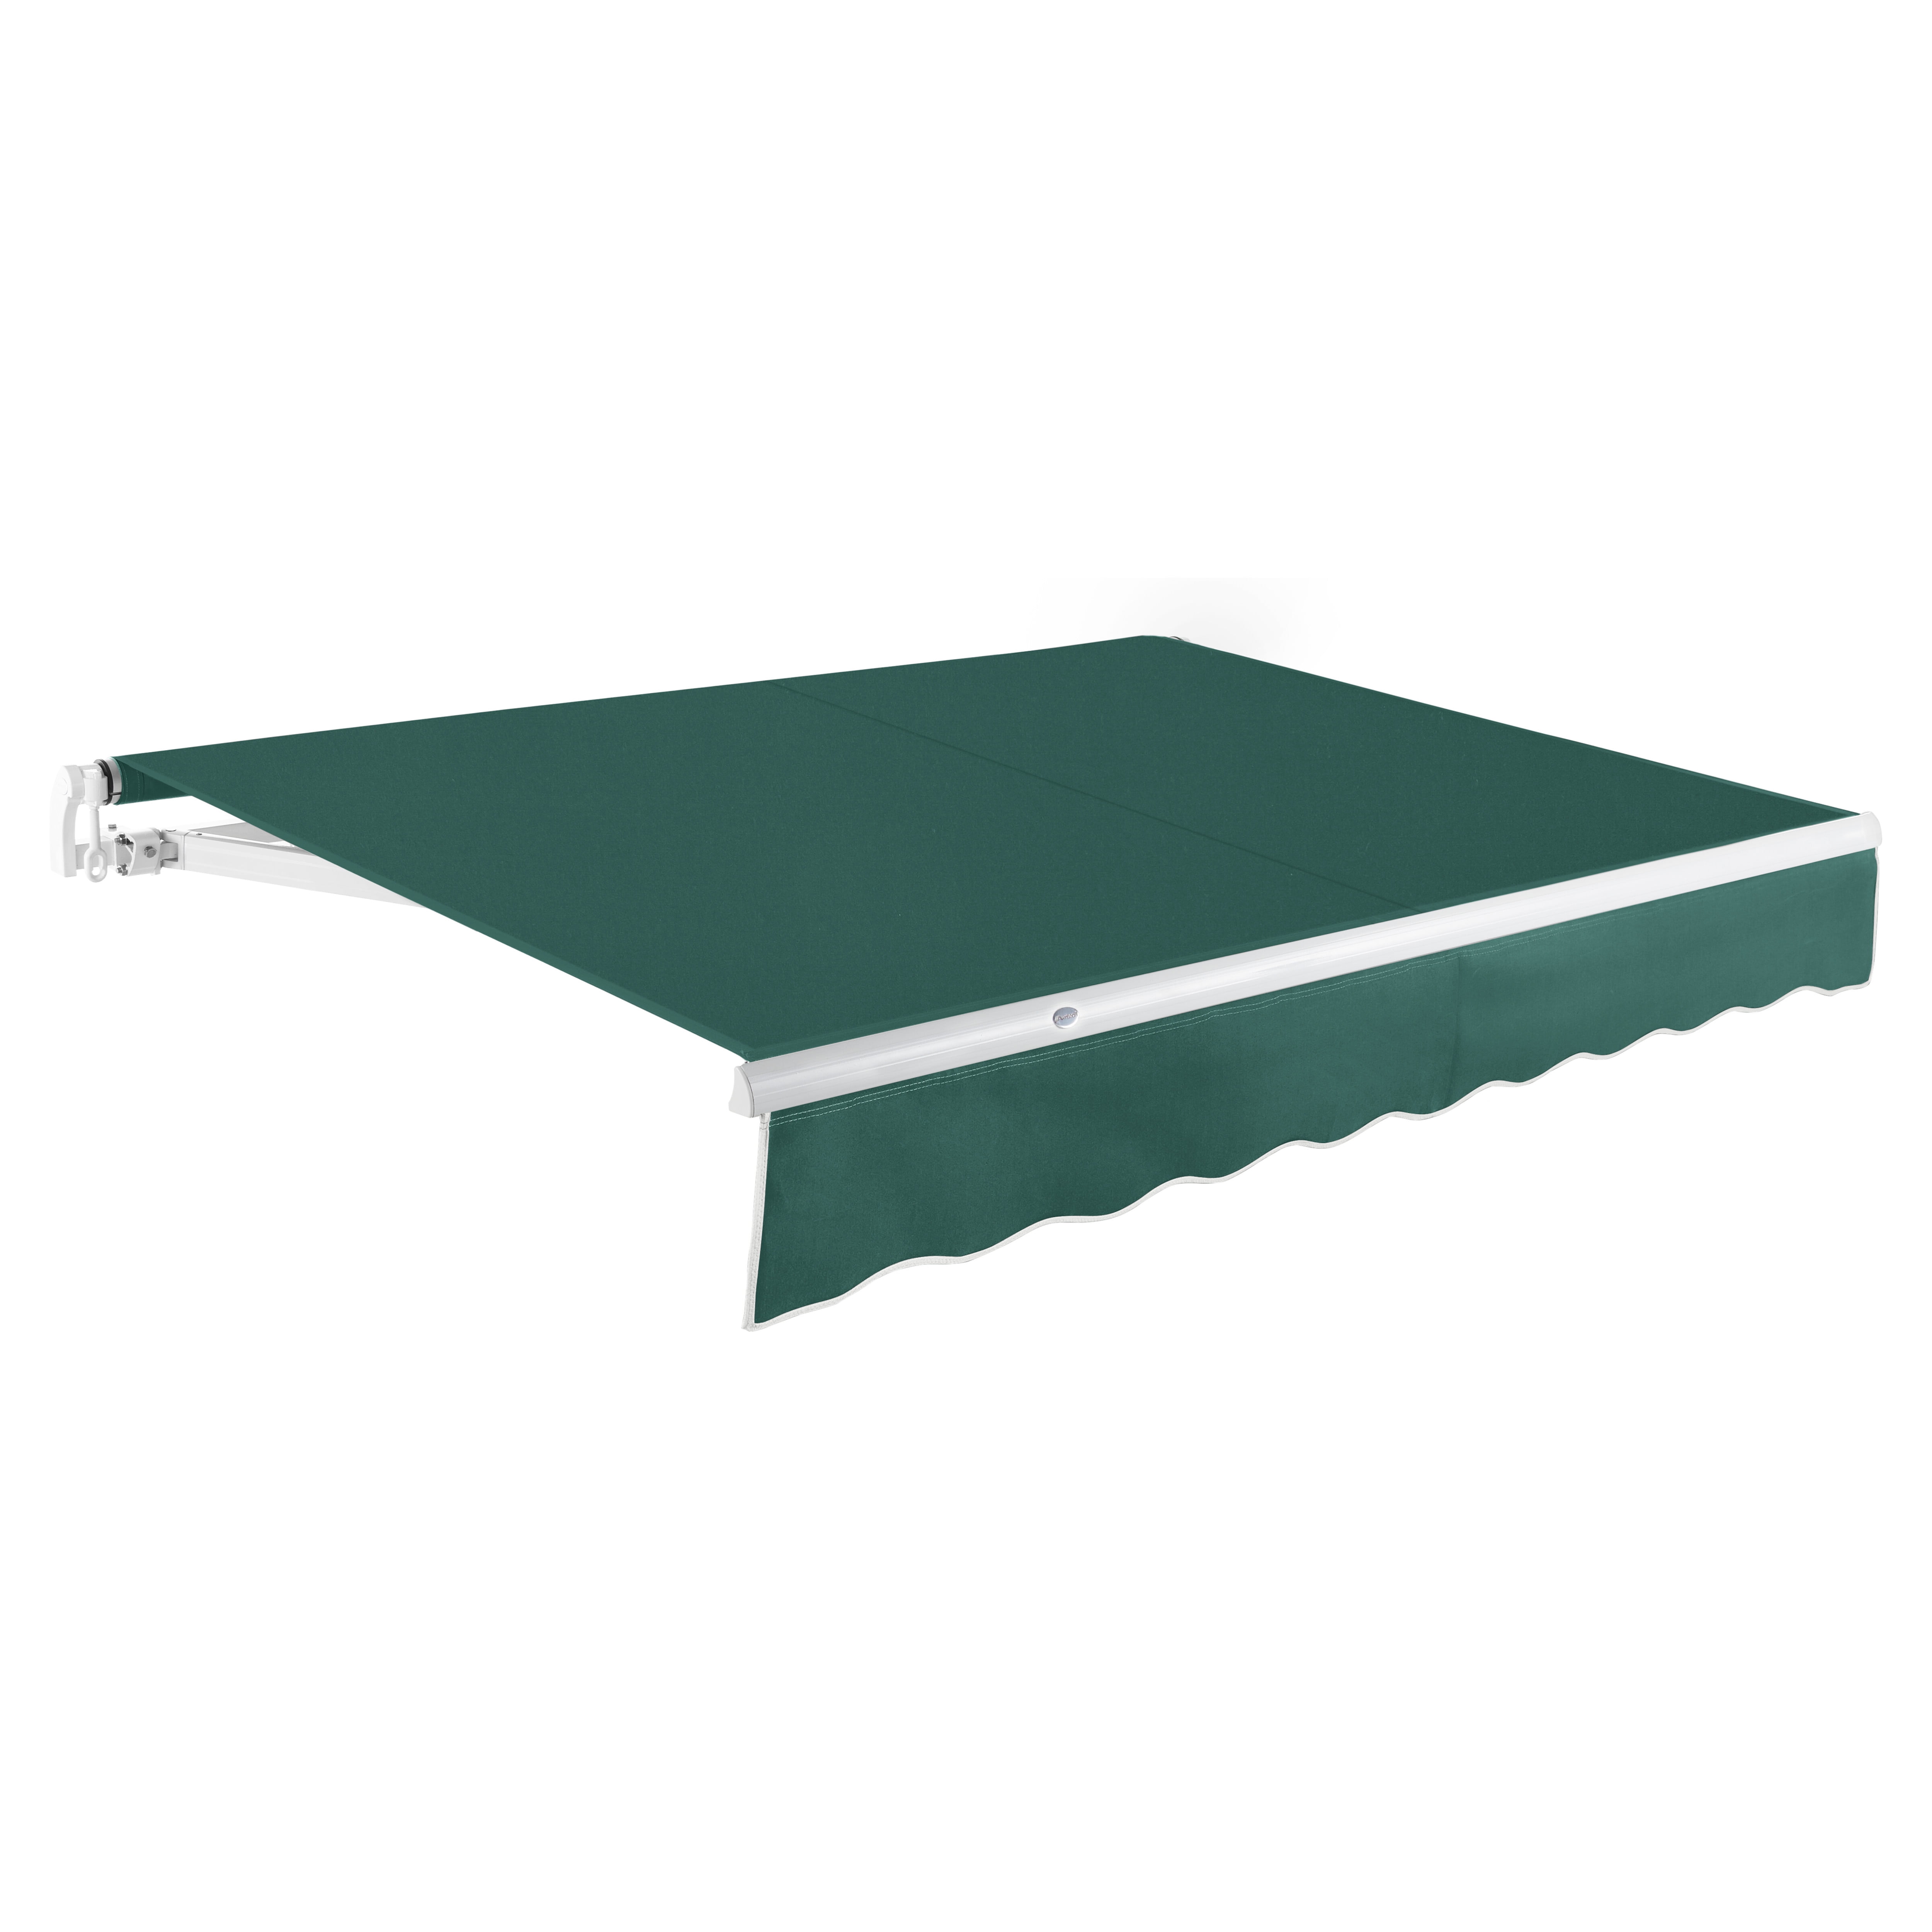 Henley Awning Greenhurst Deluxe Easy Fit Patio Awning Green and White Awning 